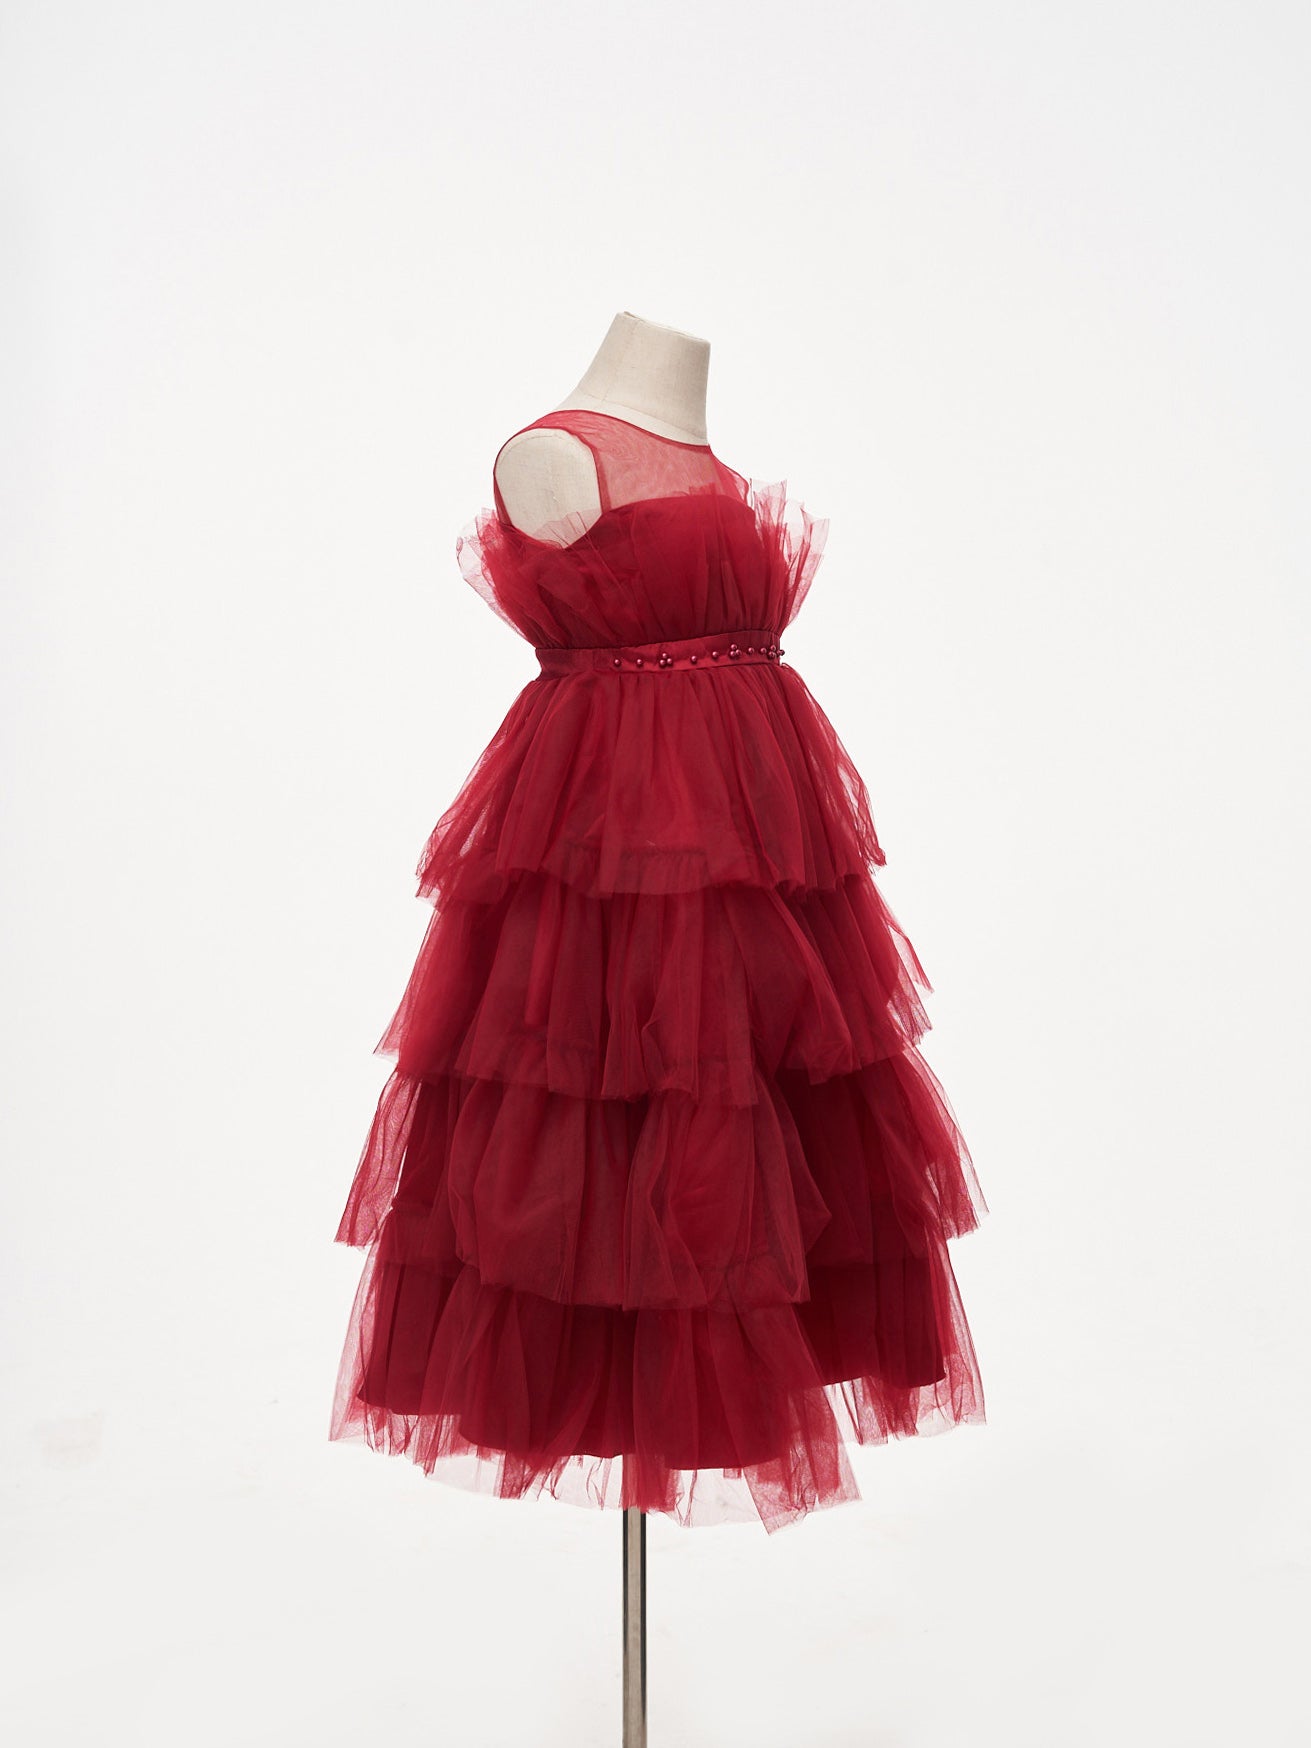 Kate Red Tulle Princess Kids Dress for Photography